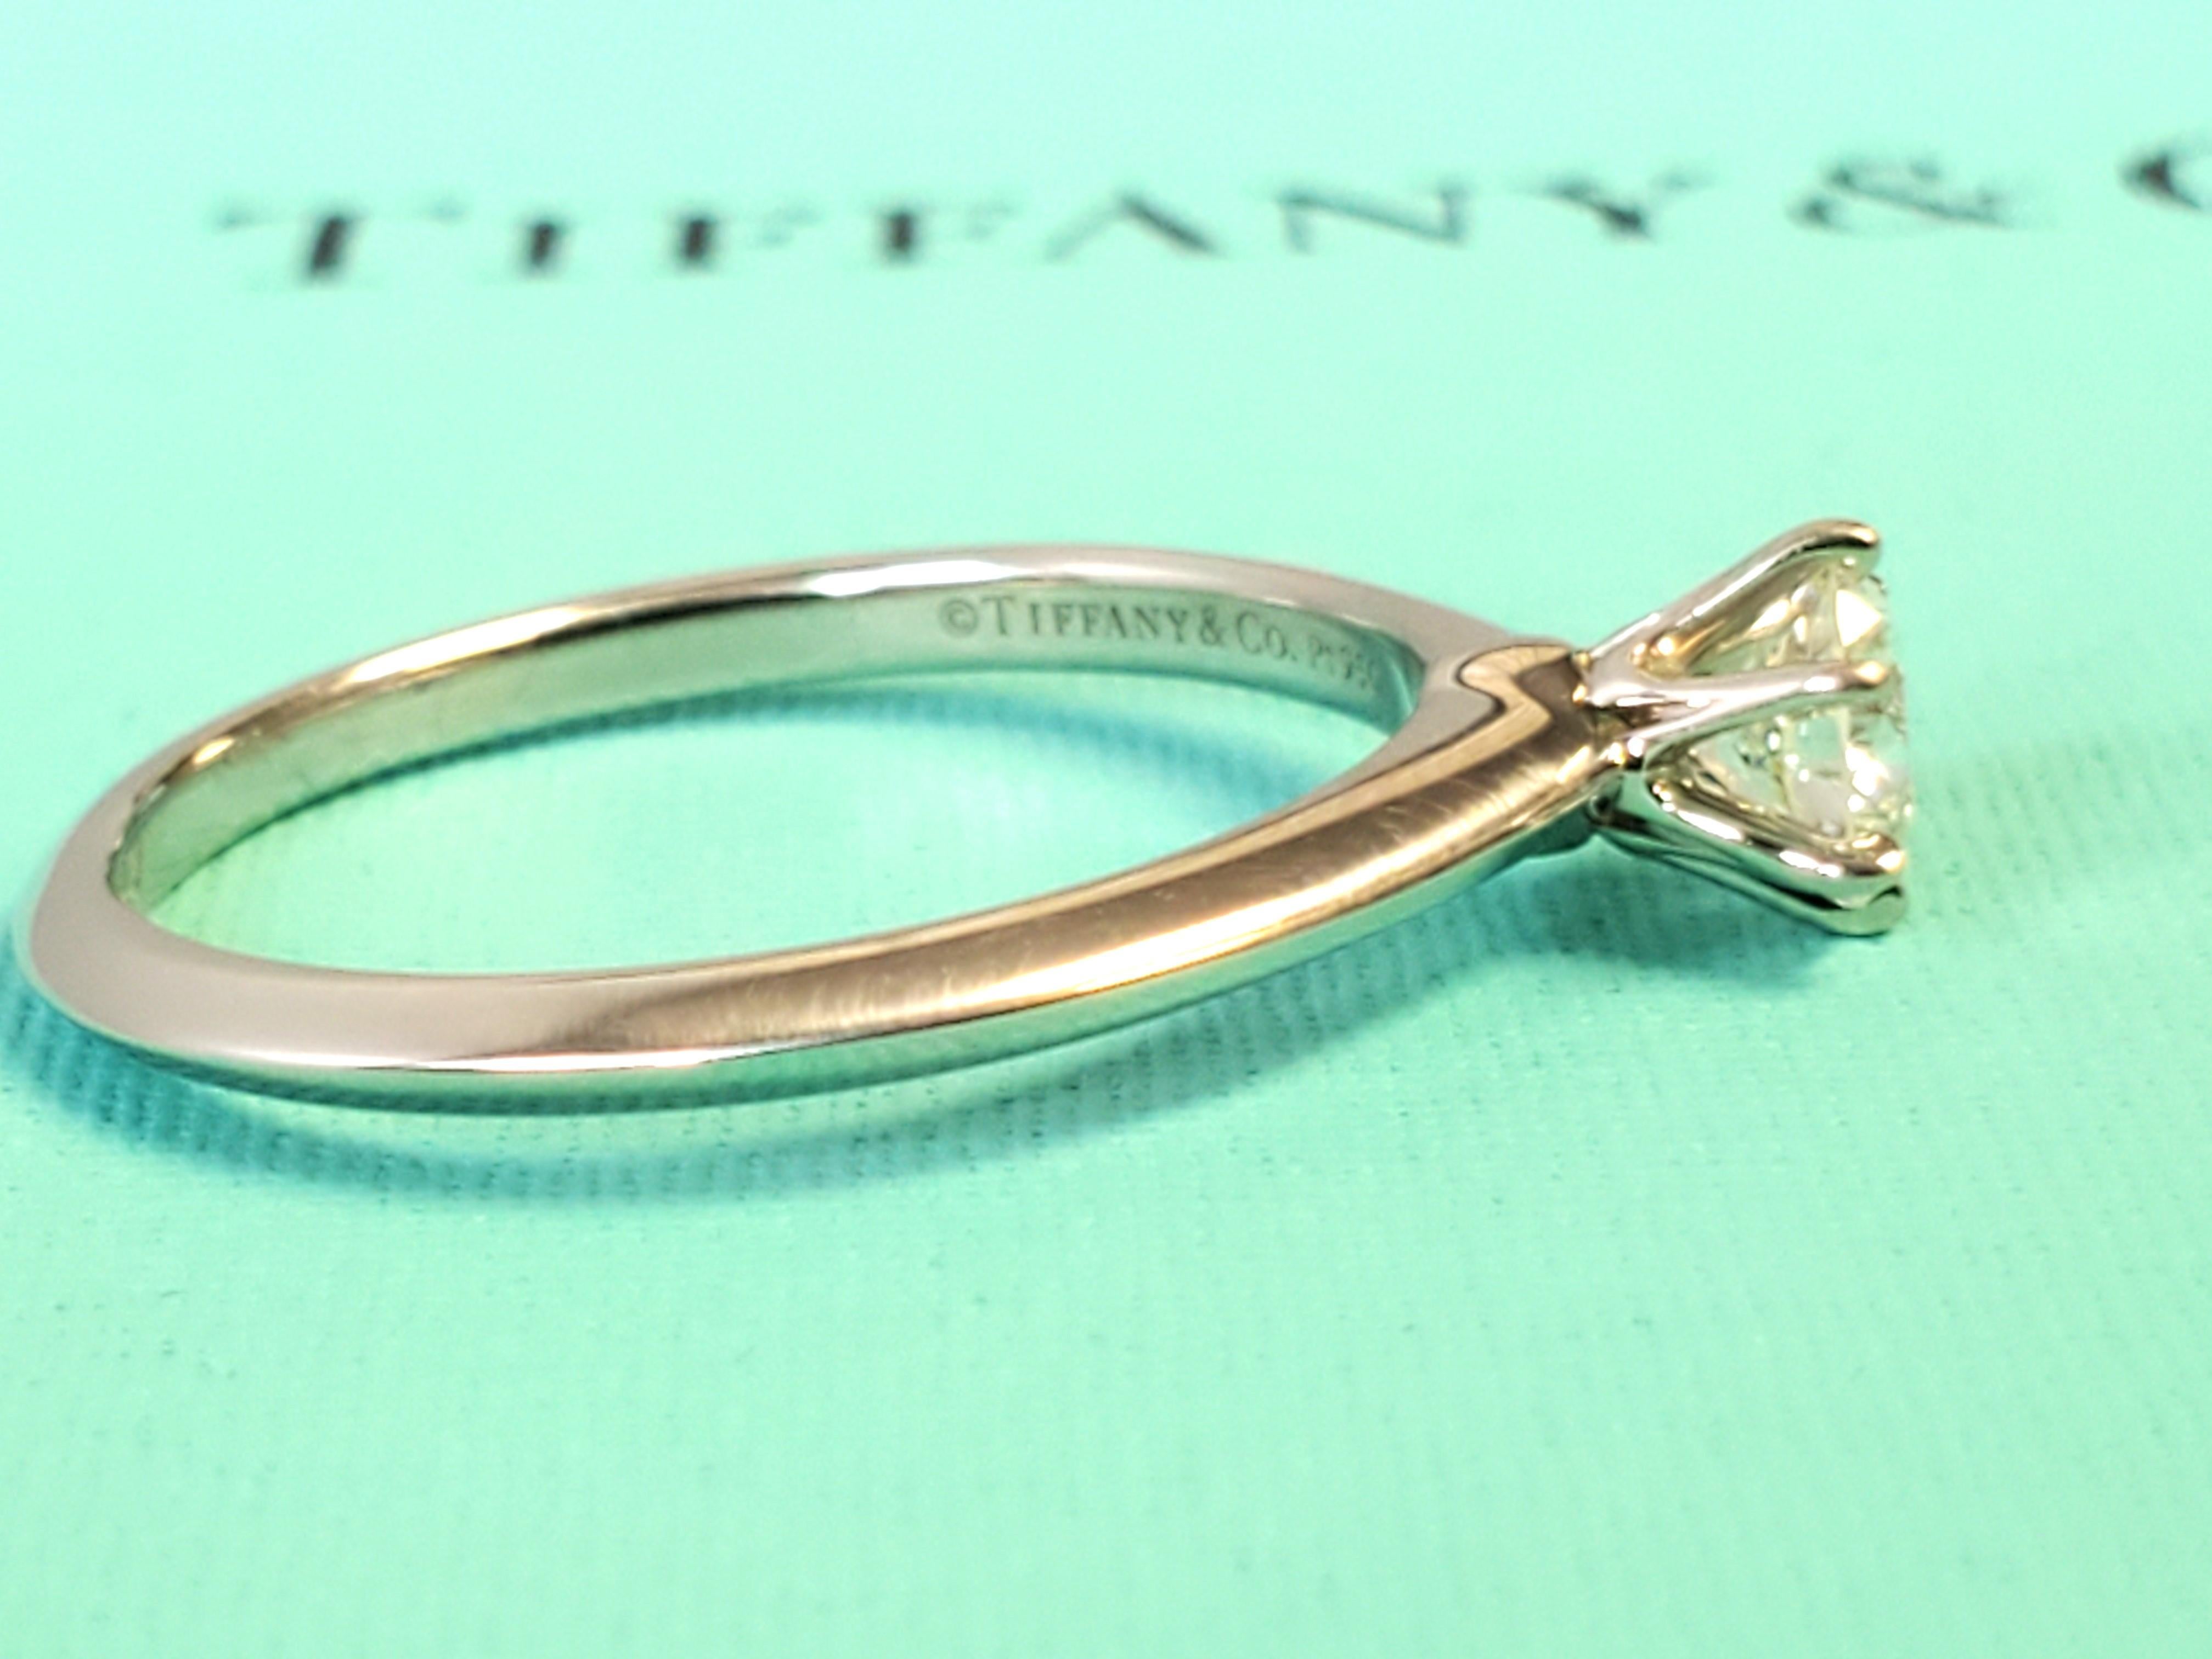 Tiffany & Co. Diamond Solitaire Platinum Engagement Ring .46ct VS1 Round In Excellent Condition For Sale In Overland Park, KS